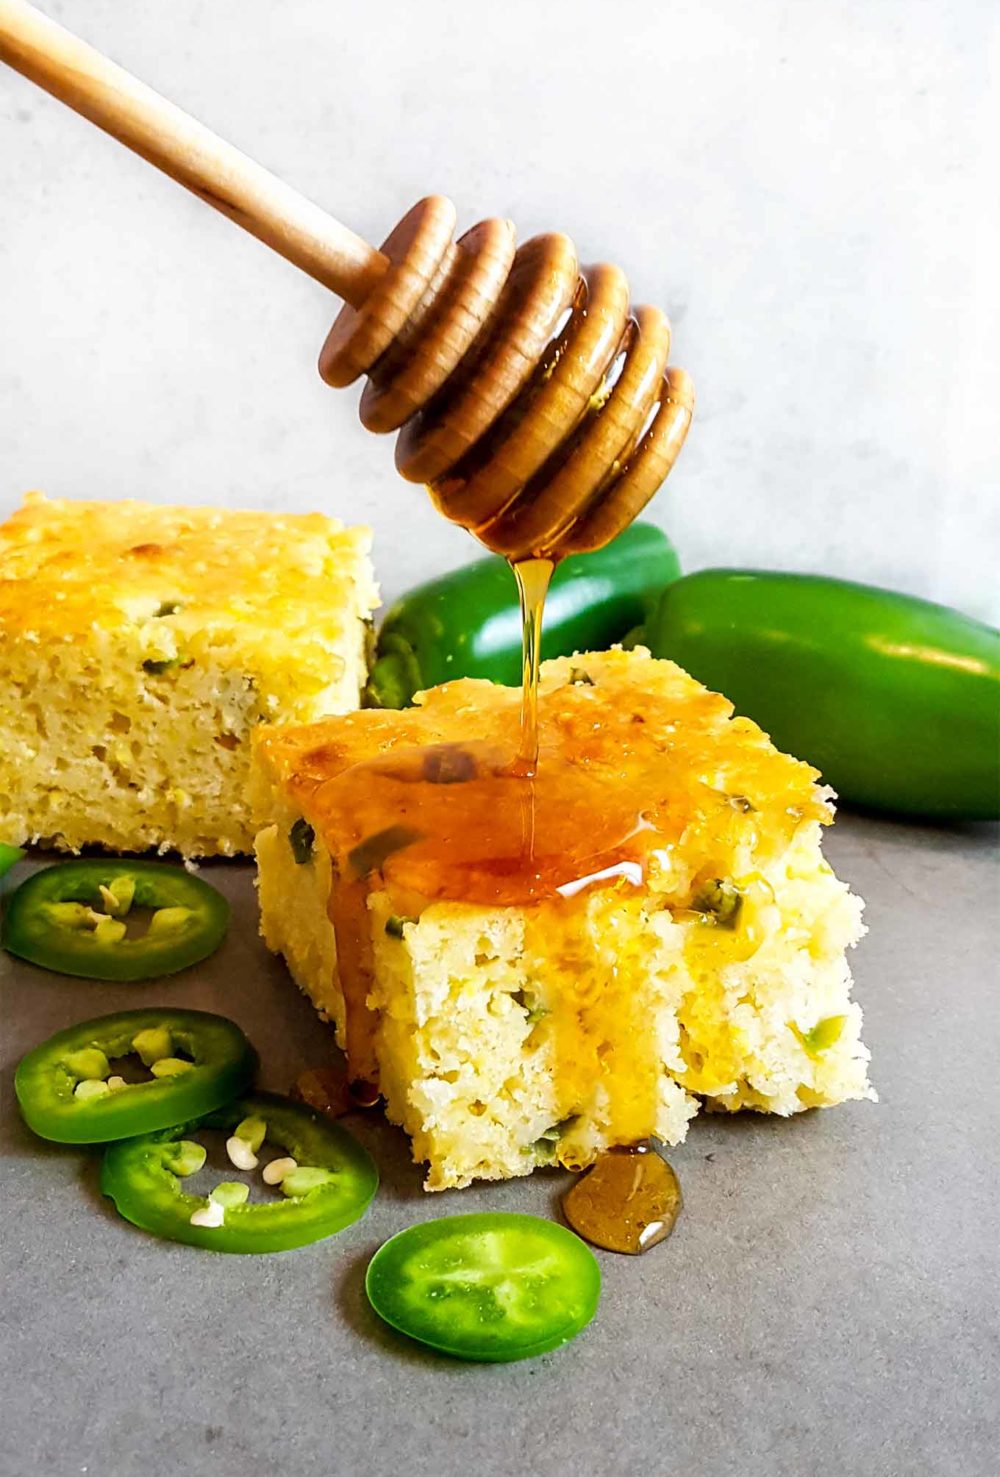 Cornbread with jalapenos and honey